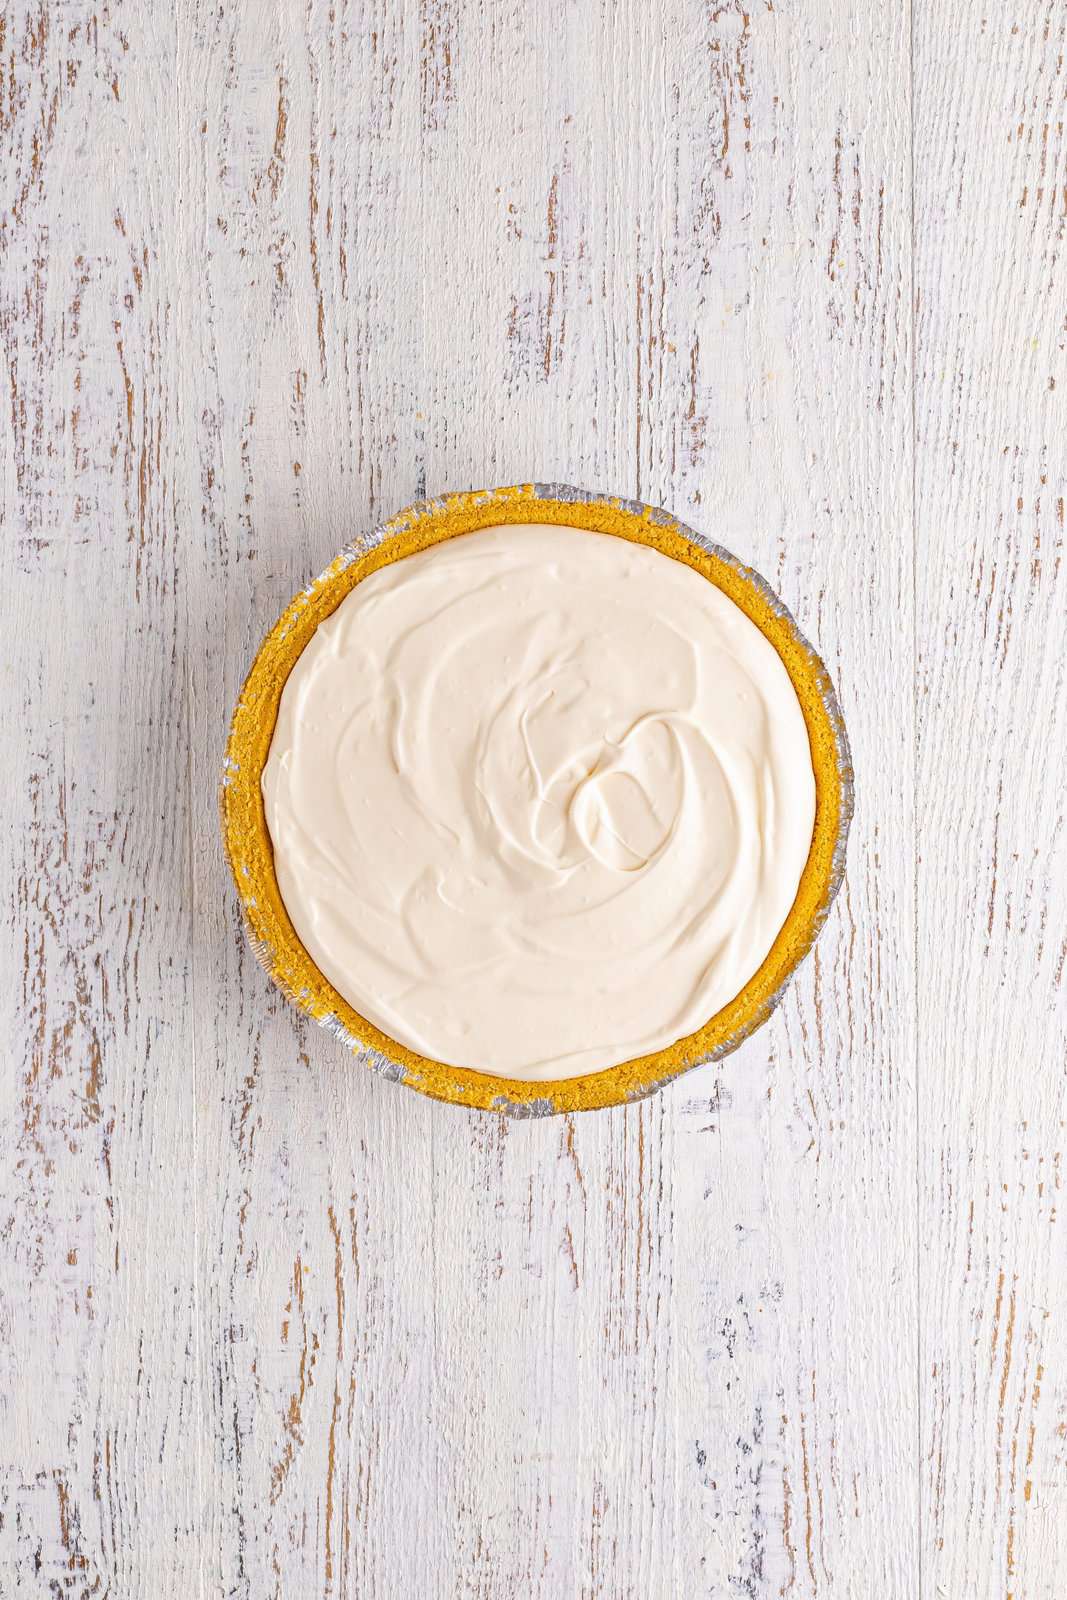 A lemonade pie with a cool whip topping.